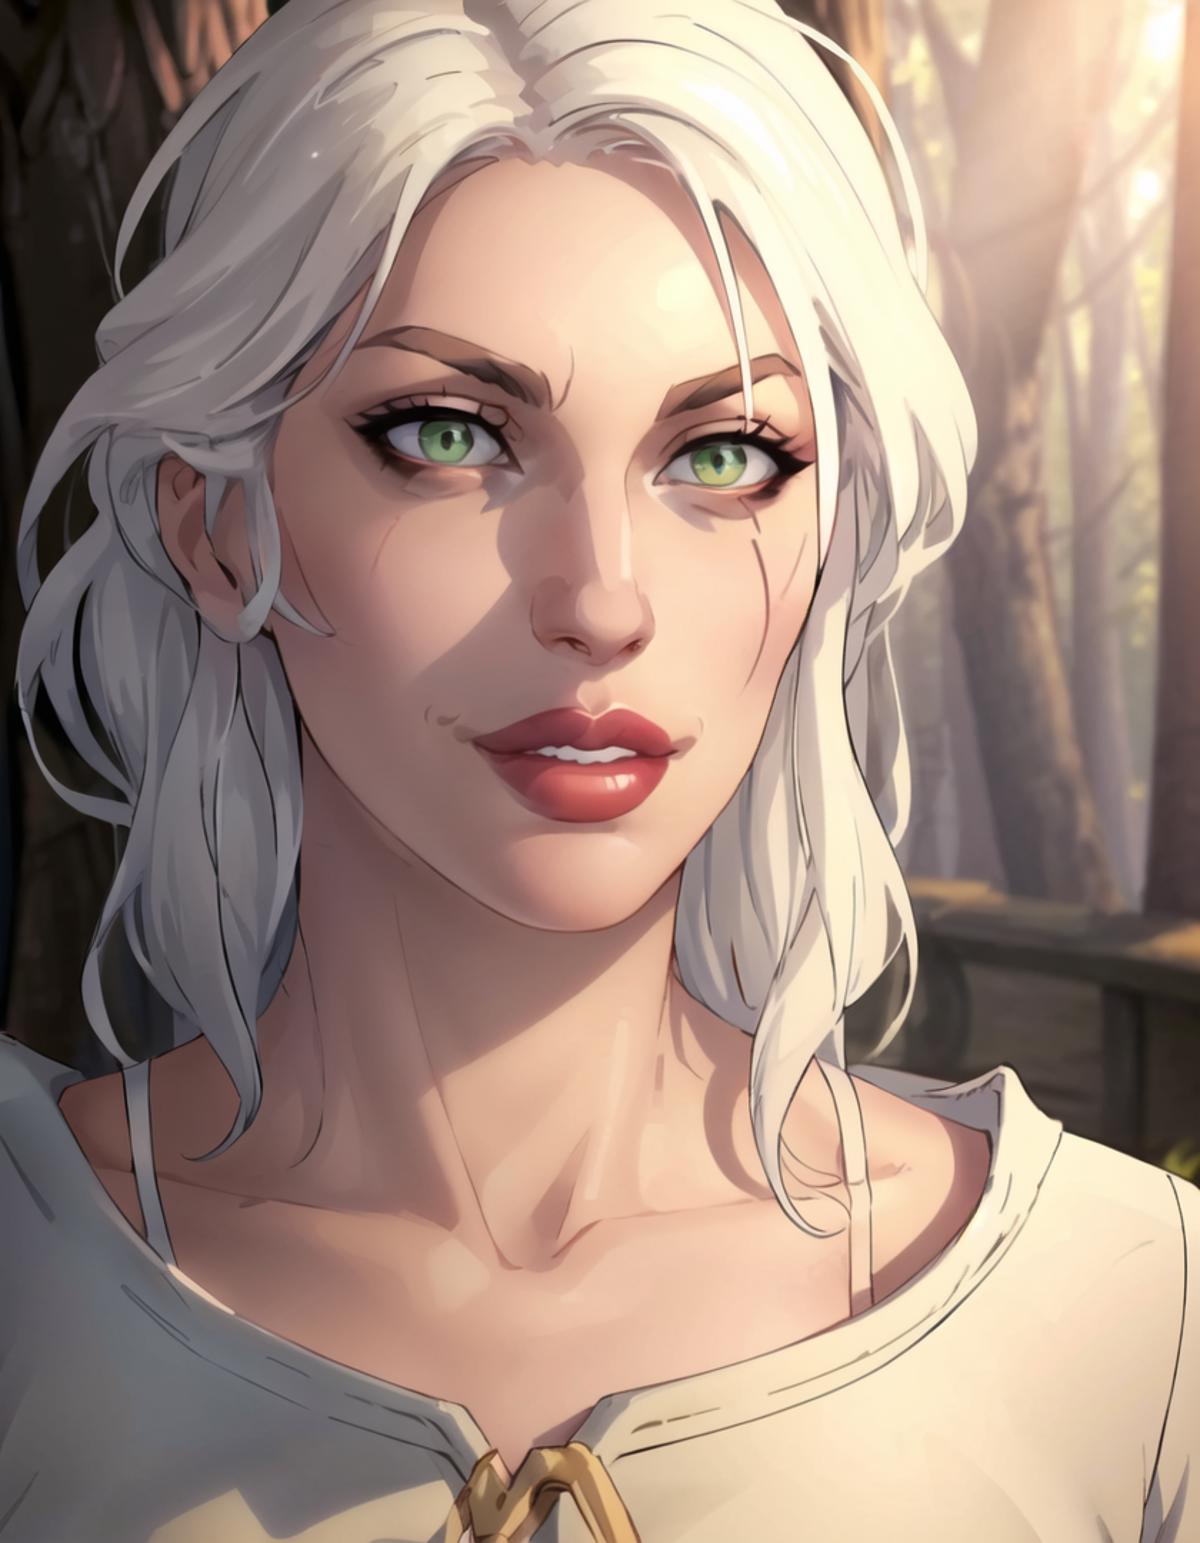 Ciri (The Witcher) image by buntar2016698